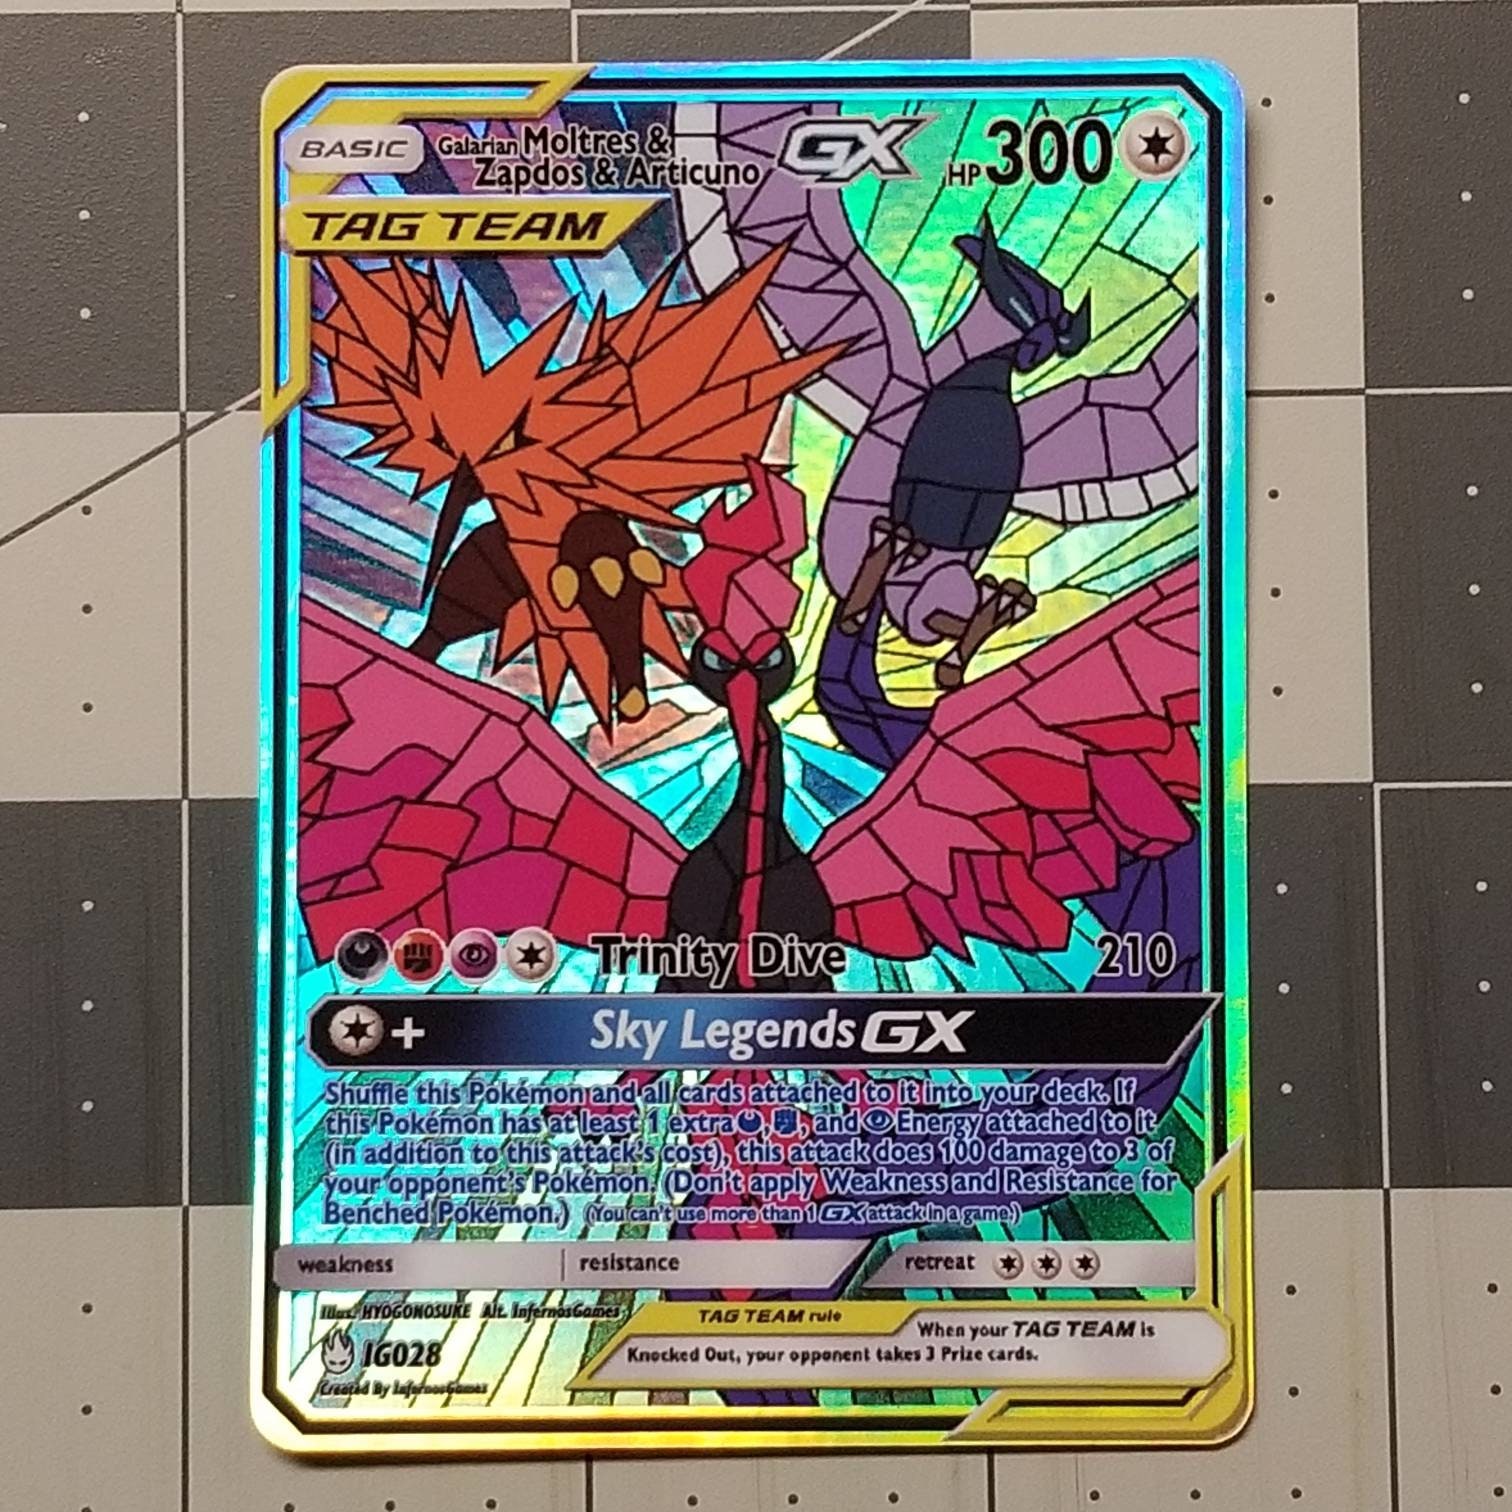 Galarian Moltres Zapdos Articuno GX Stained Glass Full Art Rainbow Holo Cus...